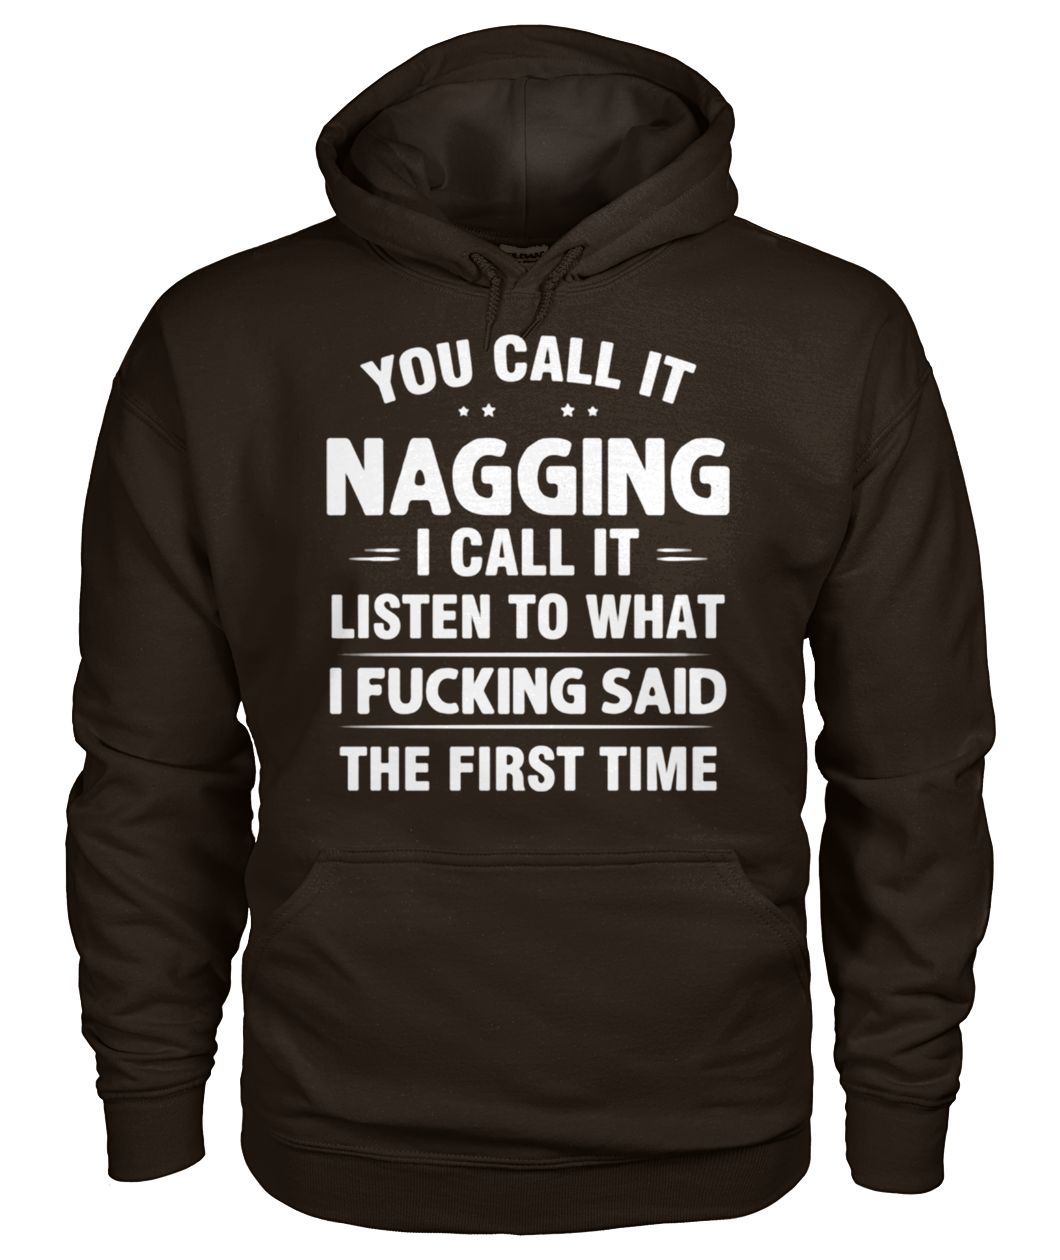 You call it nagging I call it listen to what I fucking said the first time gildan hoodie